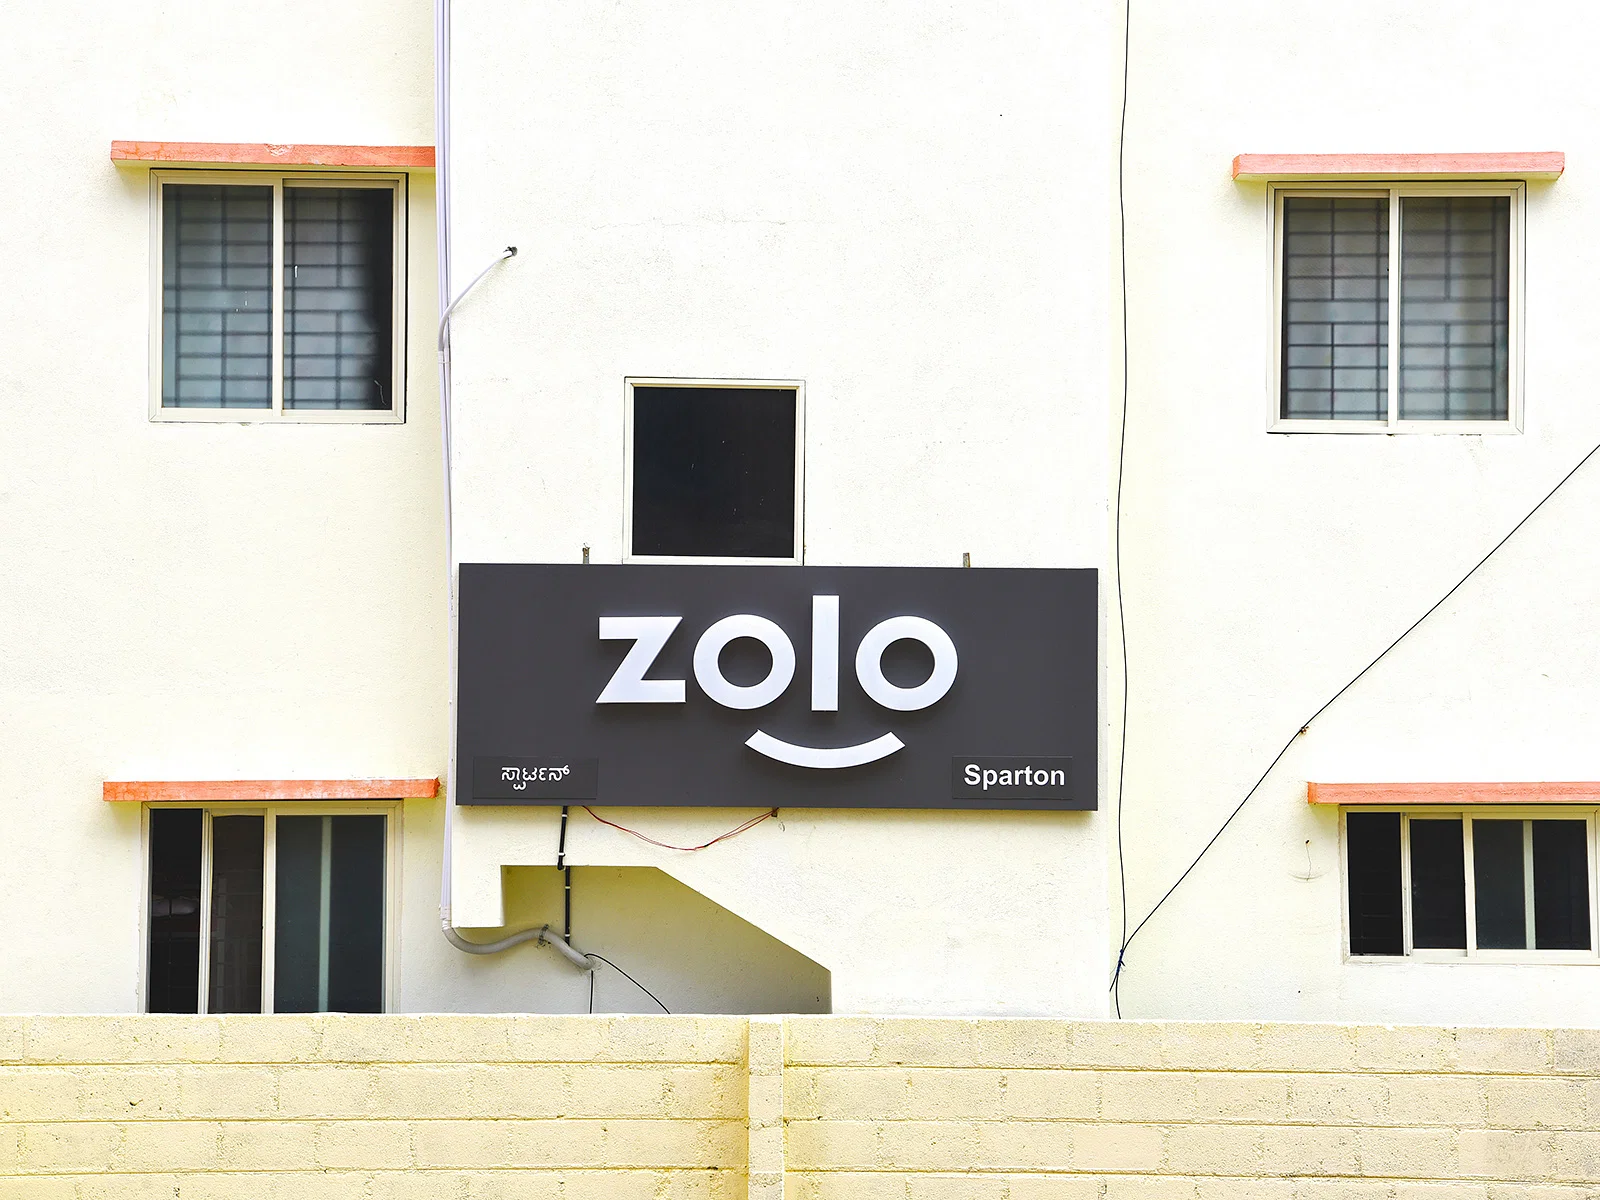 luxury PG accommodations with modern Wi-Fi, AC, and TV in Rajanukunte-Bangalore-Zolo Sparton